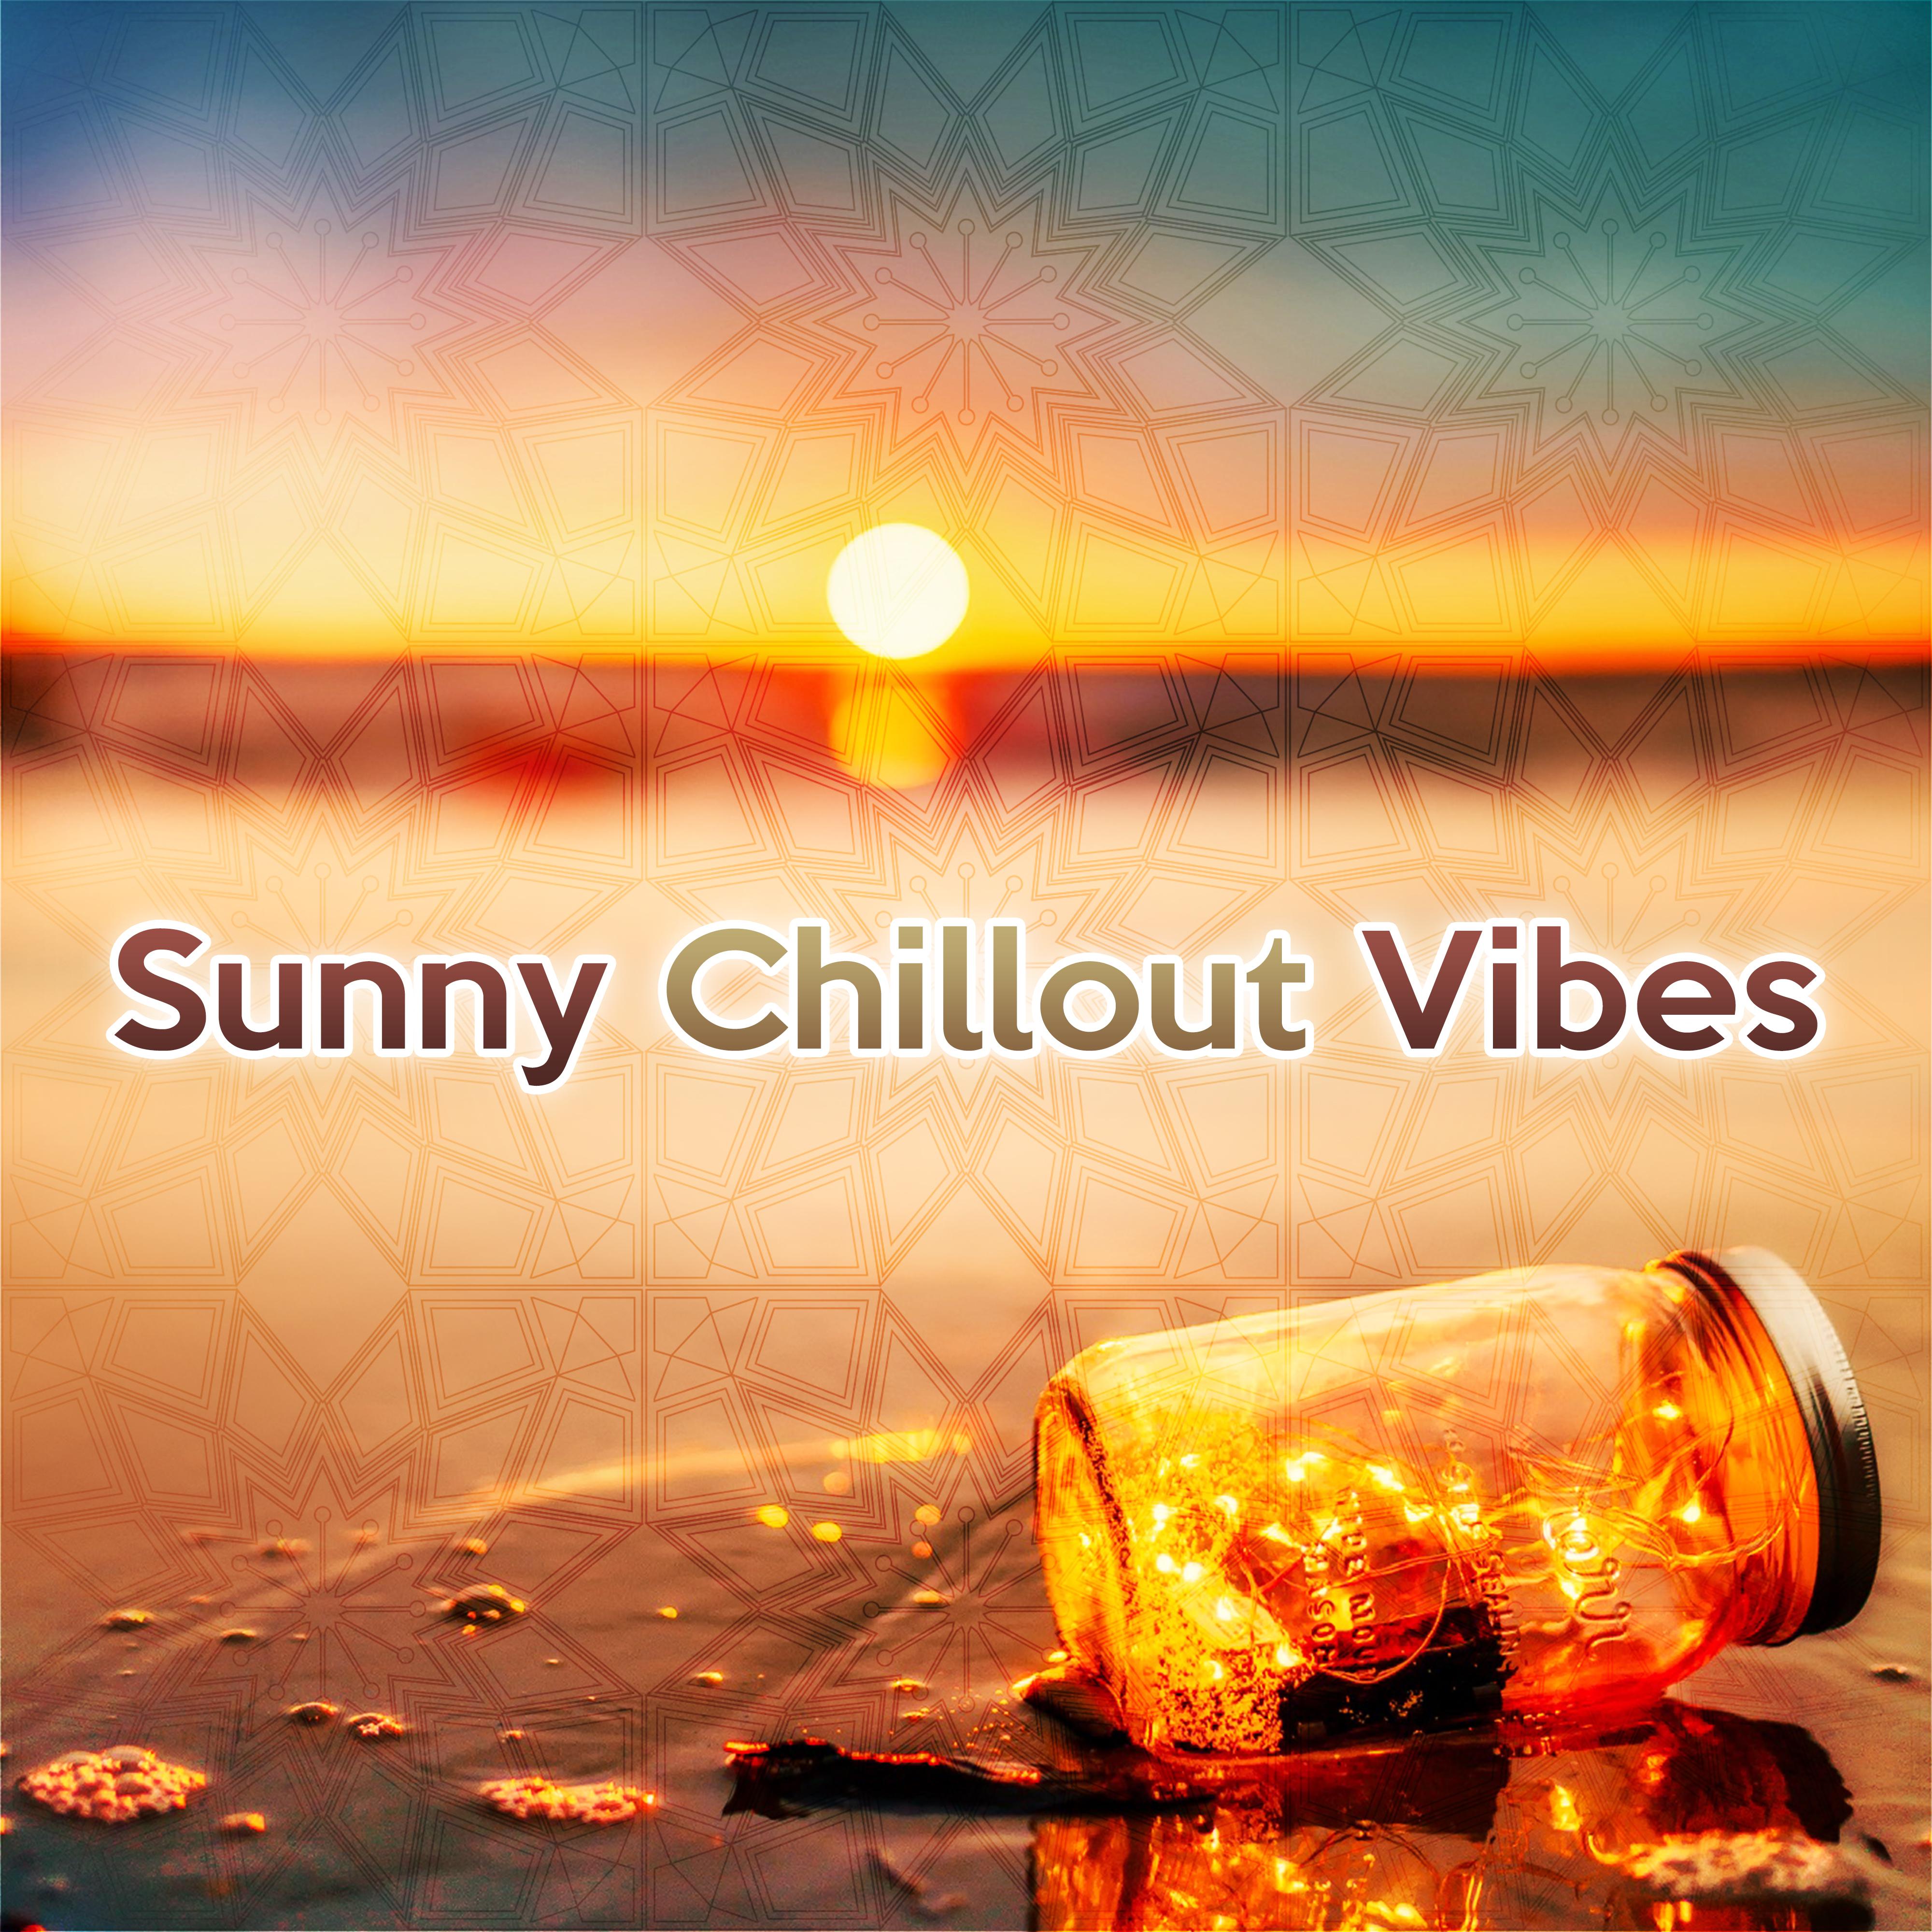 Sunny Chillout Vibes – Ibiza Party, Dance Music, Total Relaxation, Summer Hits, Chill Out Songs